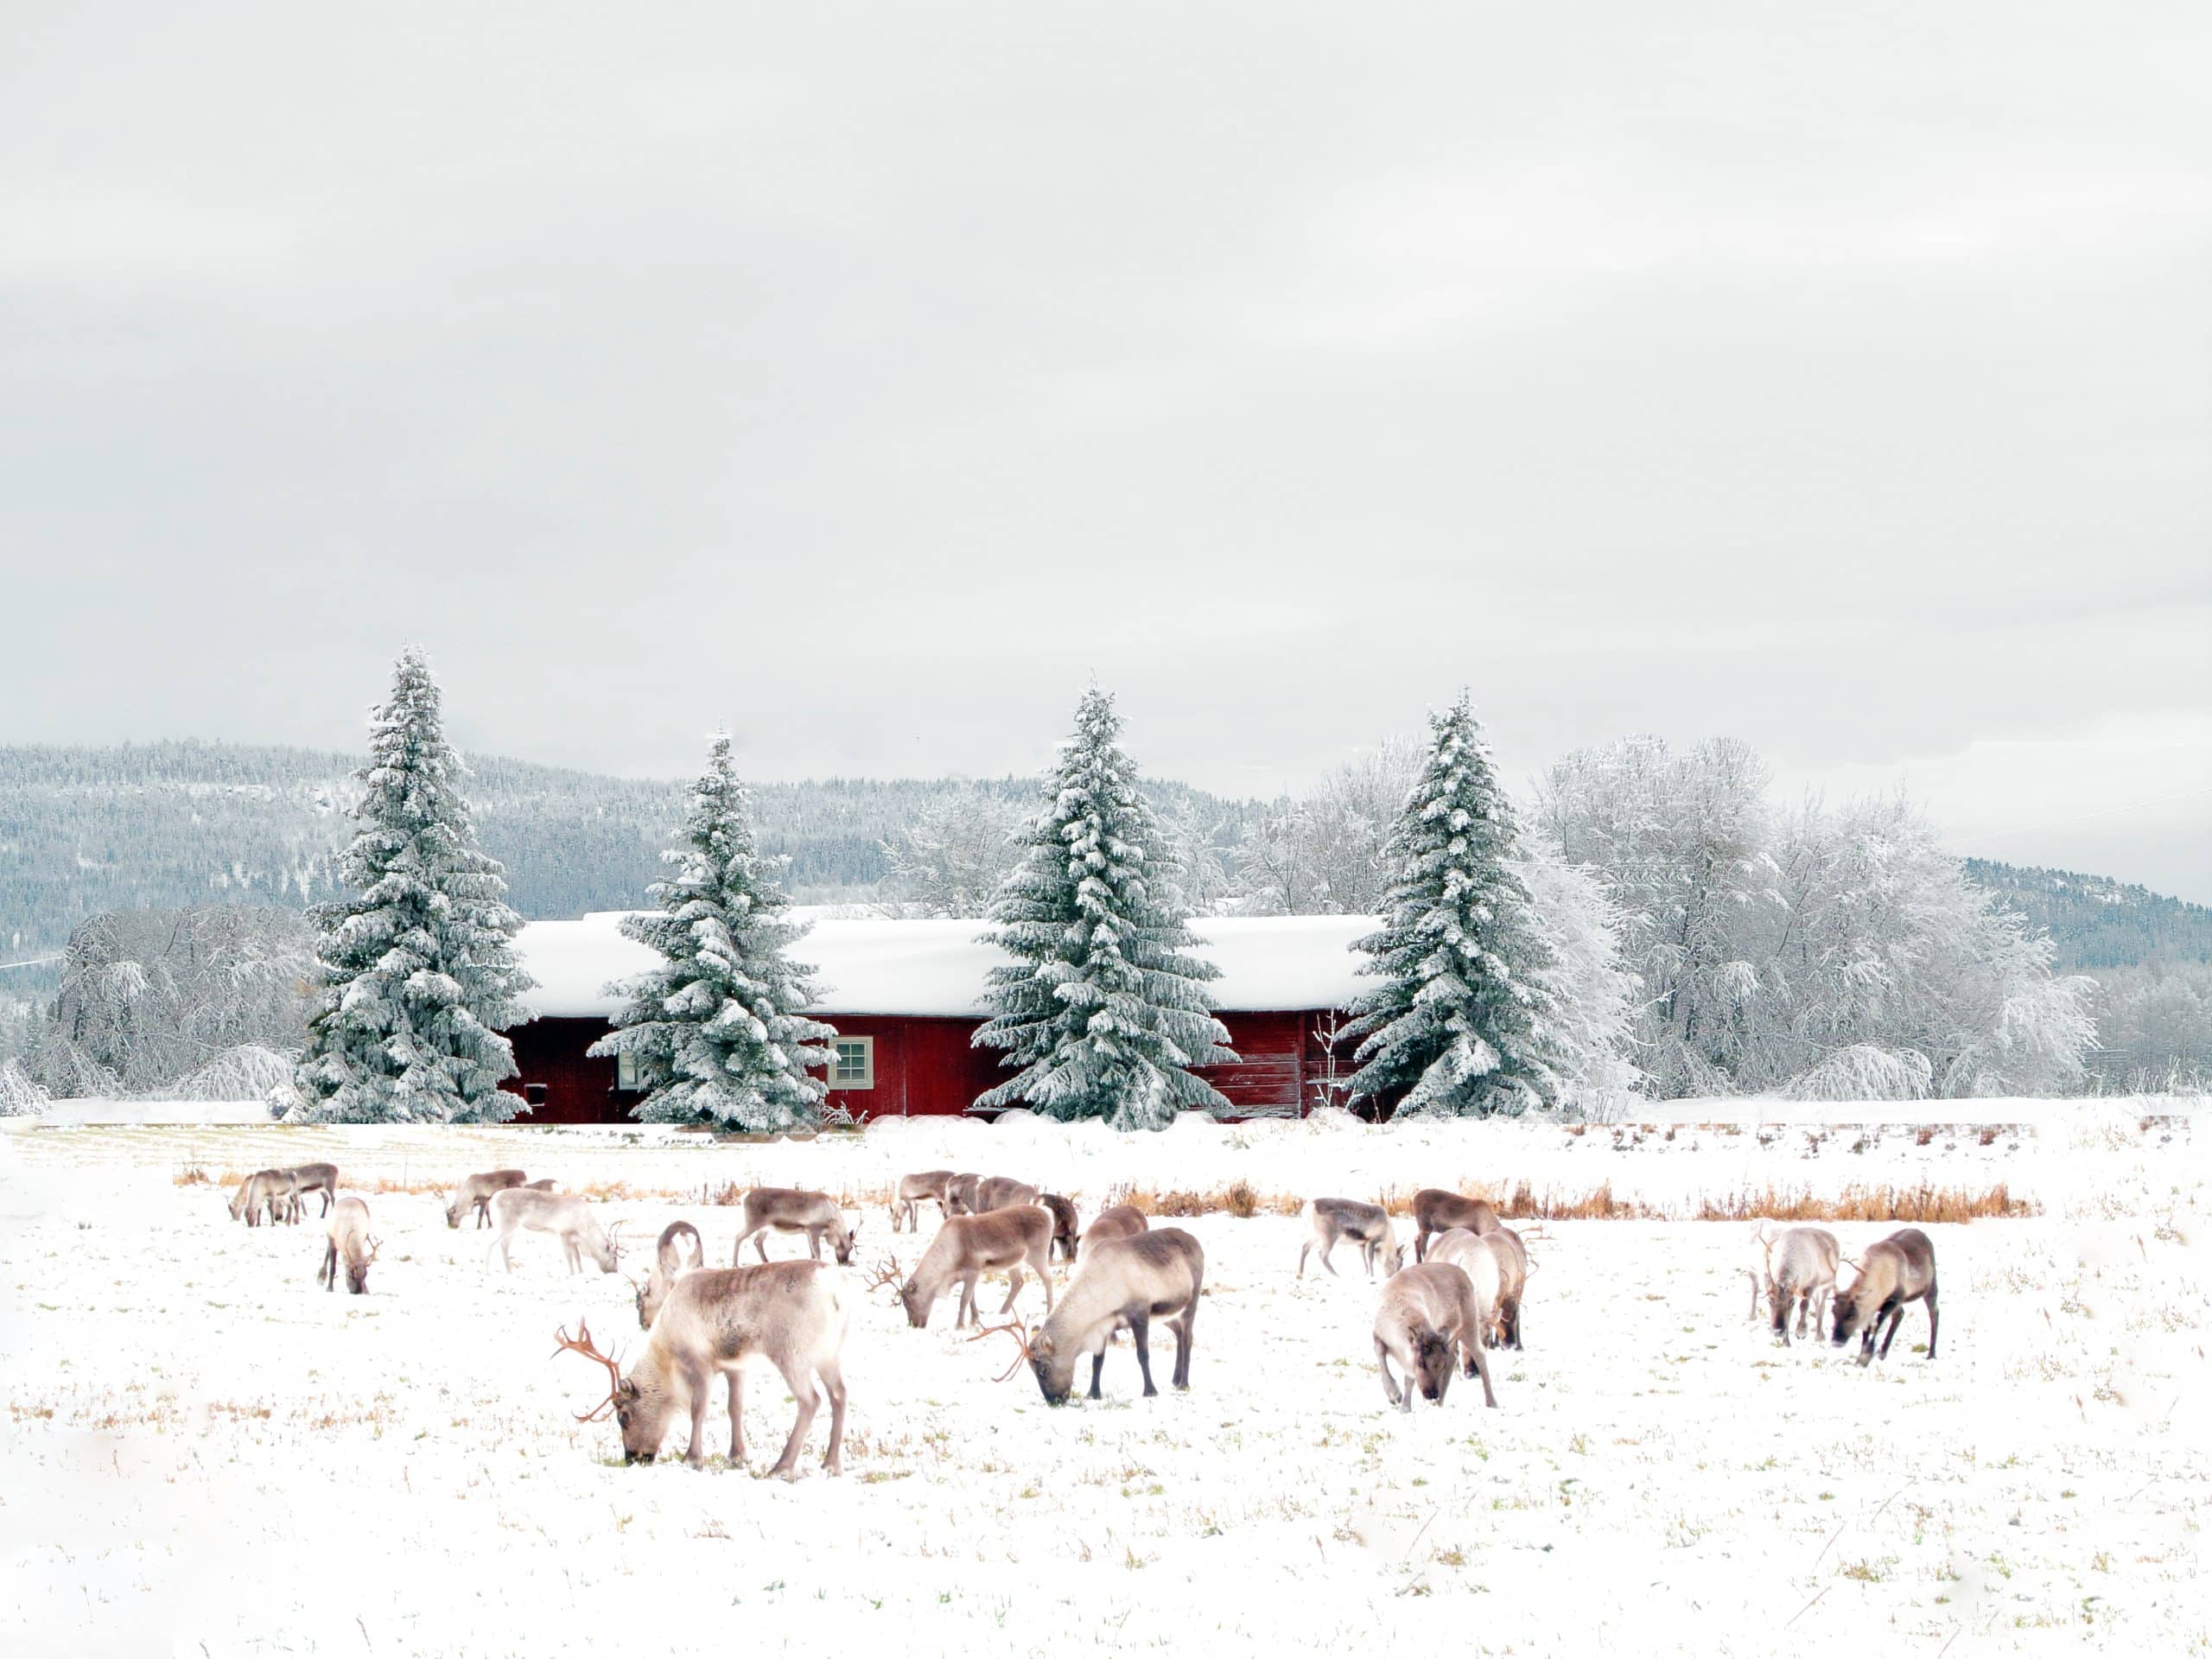 Snow, spruces and Reindeer in the wintry landscape